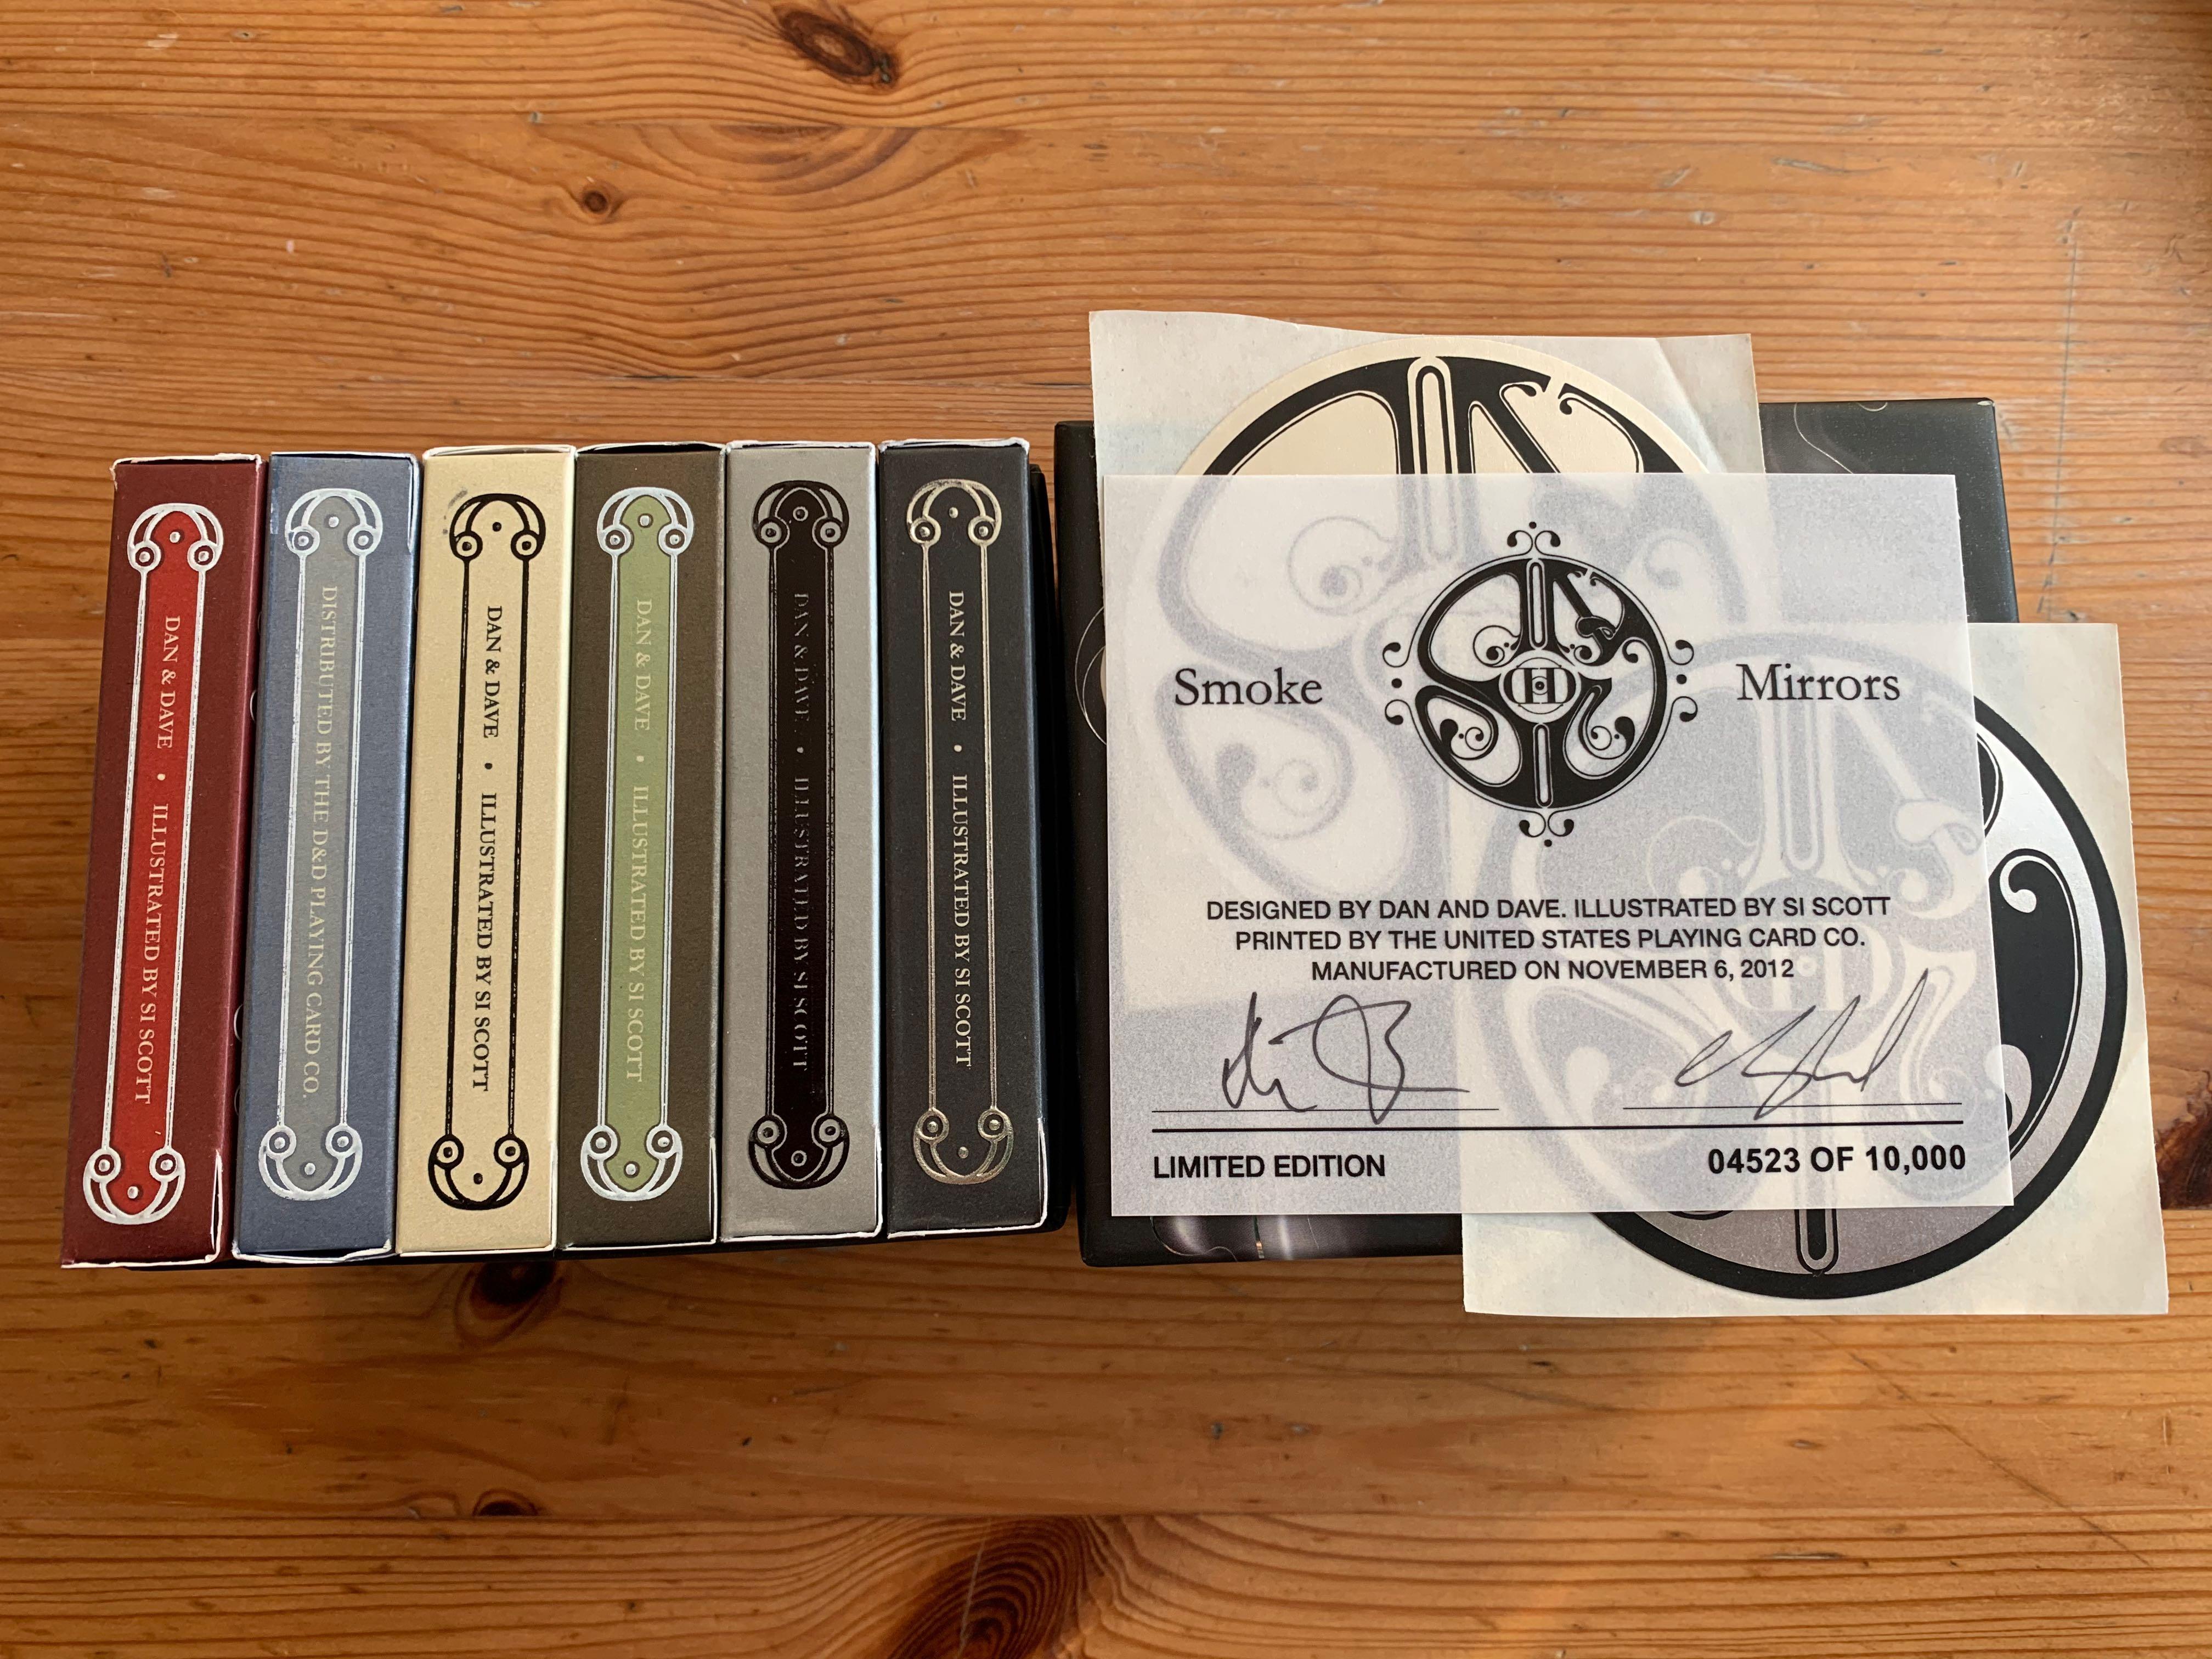 Dan and Dave Smoke and Mirrors Deluxe Box Set, 興趣及遊戲, 手作